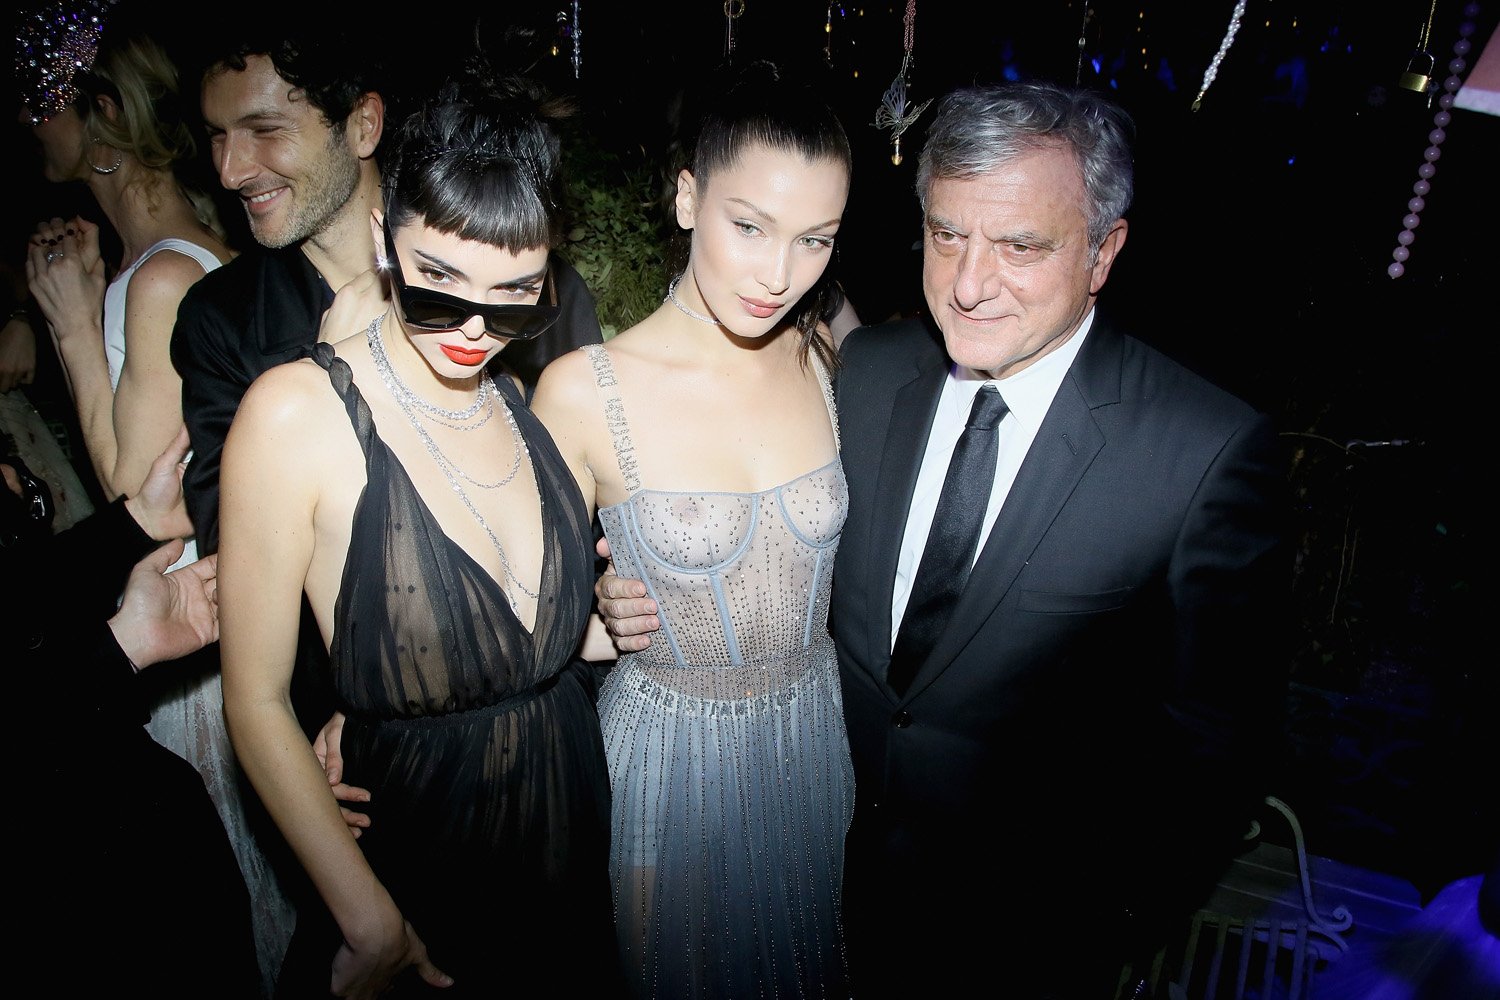 PARIS, FRANCE - JANUARY 23: (L to R) Kendall Jenner, Bella Hadi and Sidney Toledano attend the Christian Dior Haute Couture Spring Summer 2017 Bal Masque as part of Paris Fashion Week on January 23, 2017 in Paris, France. (Photo by Victor Boyko/Getty Images for Dior) *** Local Caption *** Kendall Jenner; Bella Hadid; Sidney Toledano